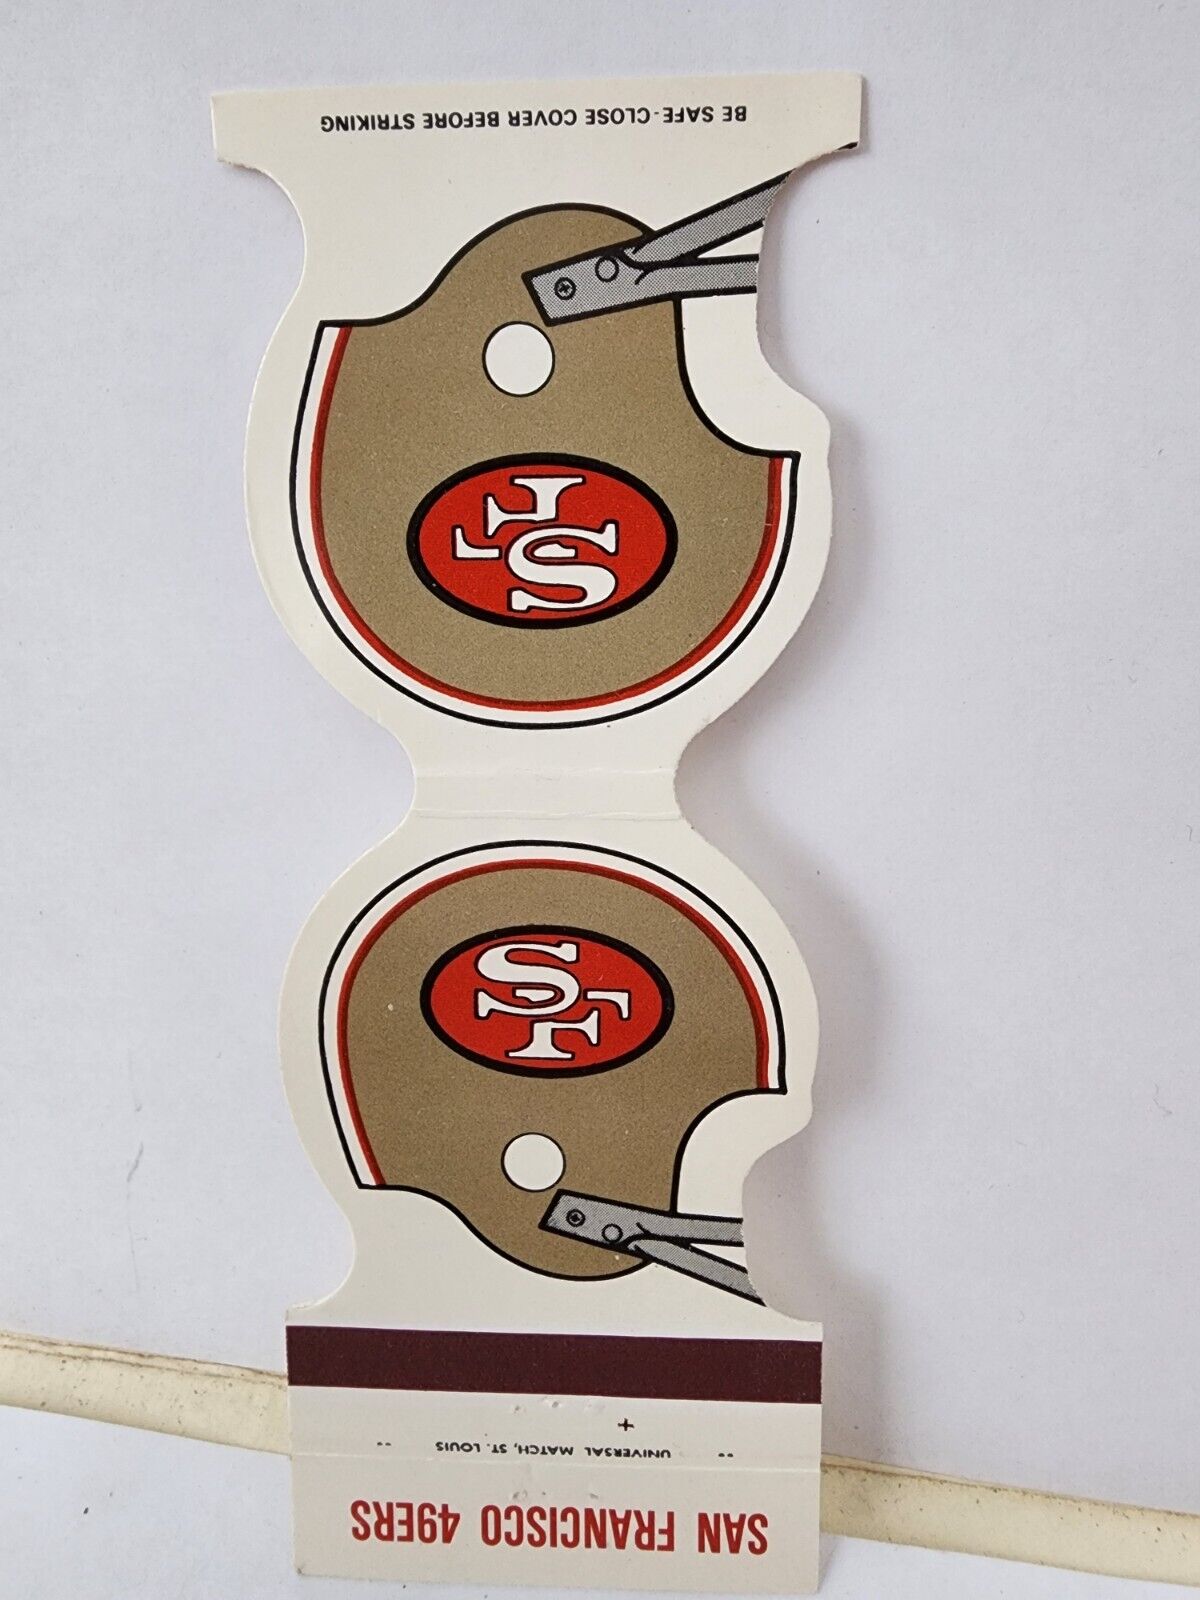 Vintage Matchbook Cover - 1980 San Francisco 49ers Football Schedule 40th RMS